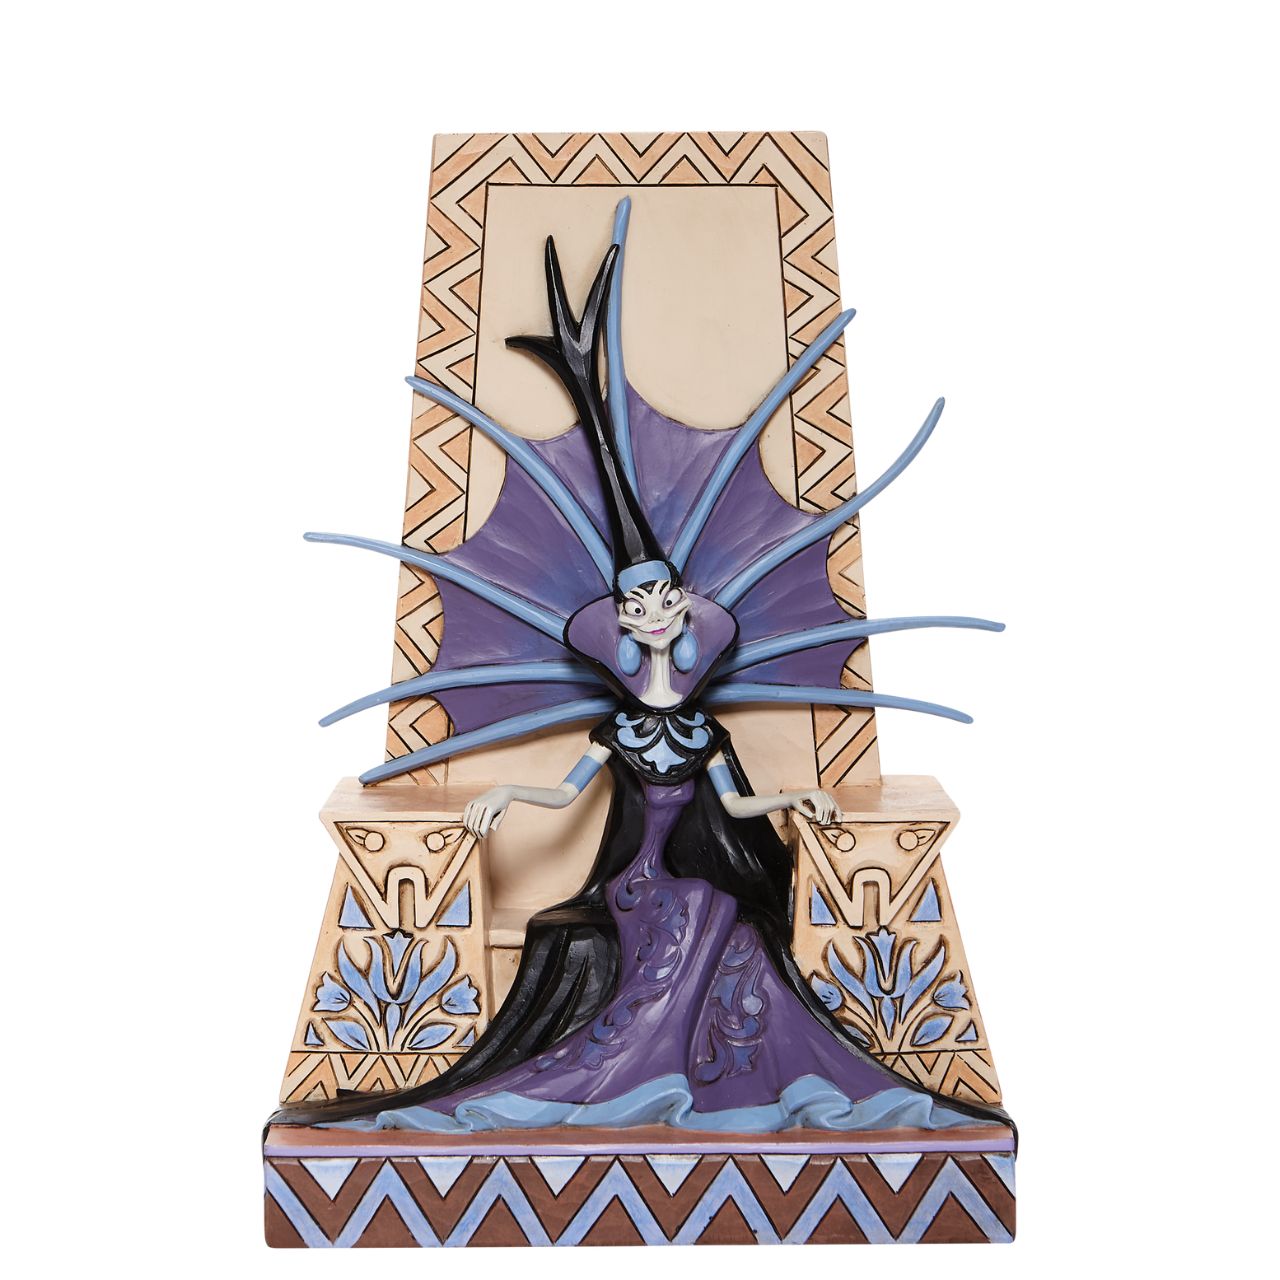 Emaciated Evil - Villain Yzma Figurine by Jim Shore   The devious diva, Yzma, yearns for power as she conspires a poisonous plot to unsurp the throne from Emperor Kuzco. Jim Shore's design captures the villain Yzma's personality from Disney's Emperor's New Groove in this intricately hand-painted and detailed sculpt.